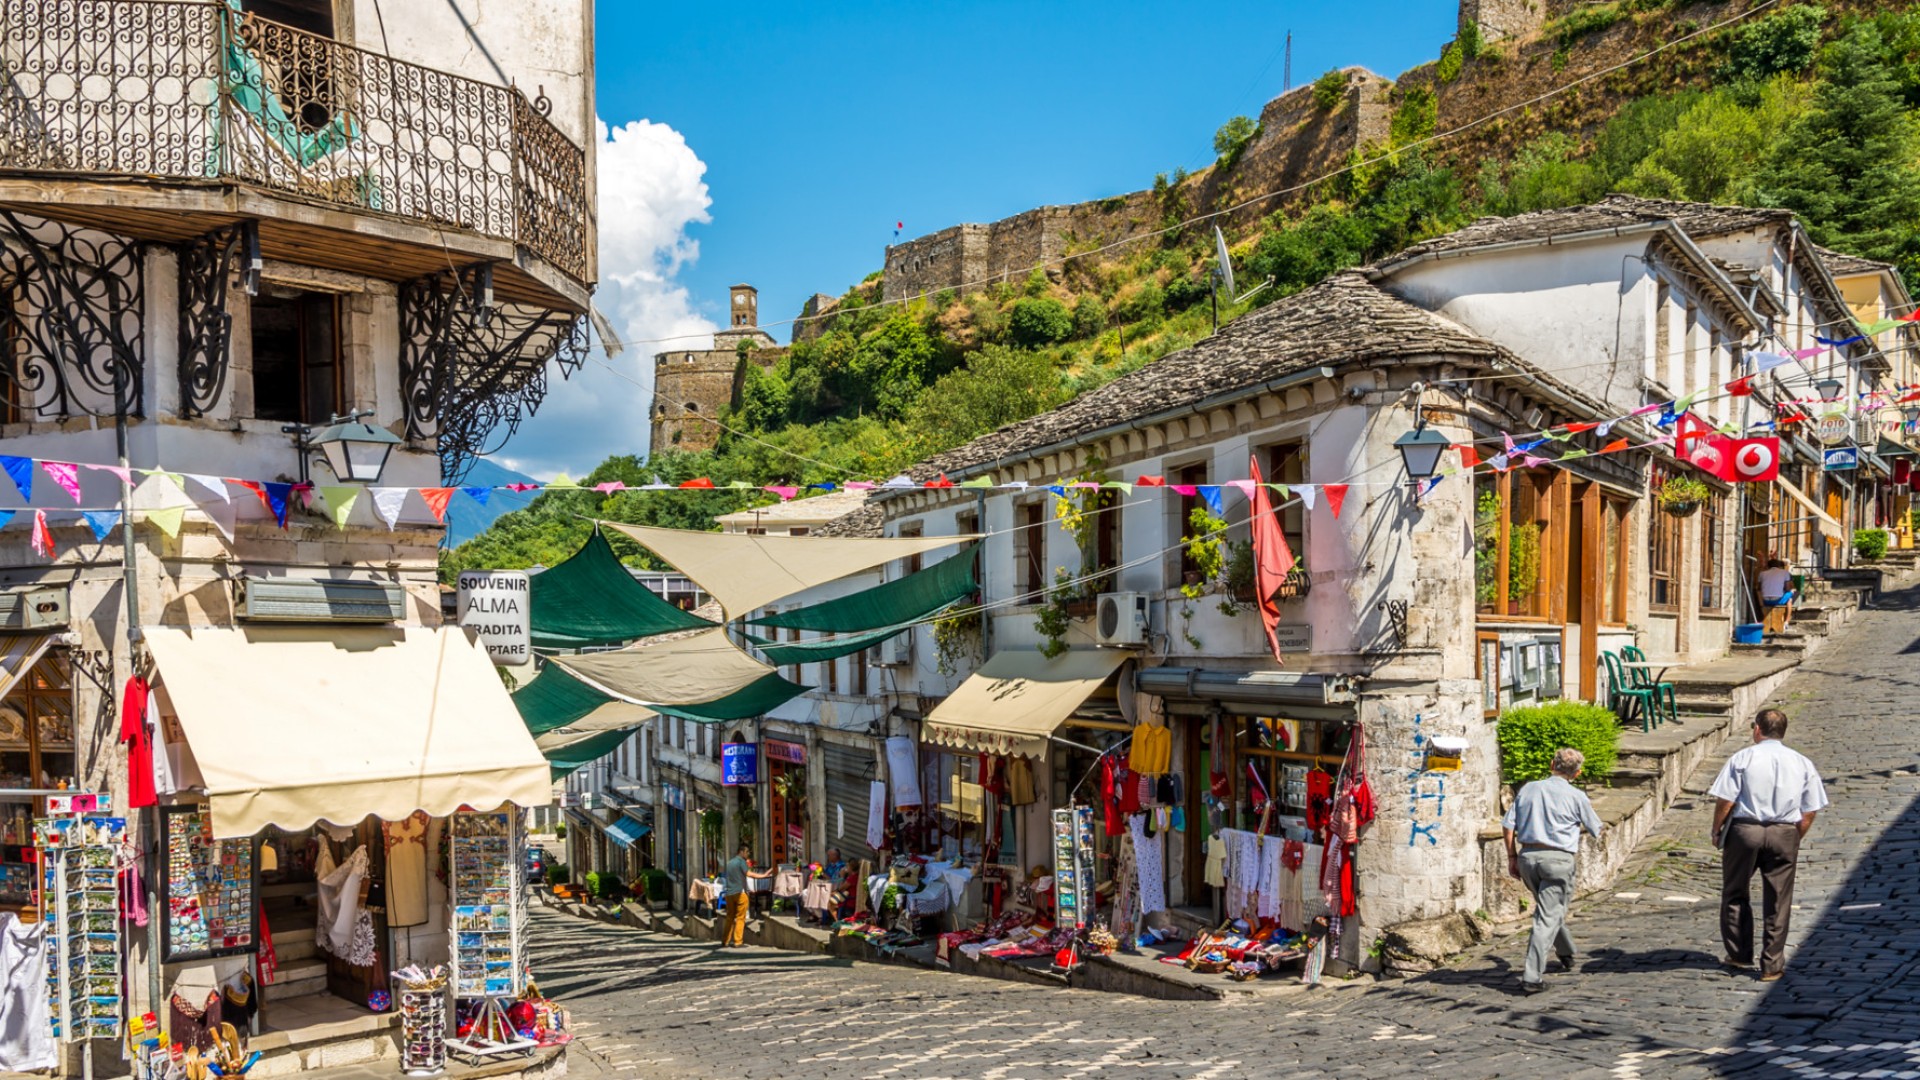 View of the historic Gjirokaster, Albania full of cobblestone roads and buildings on a sunny day